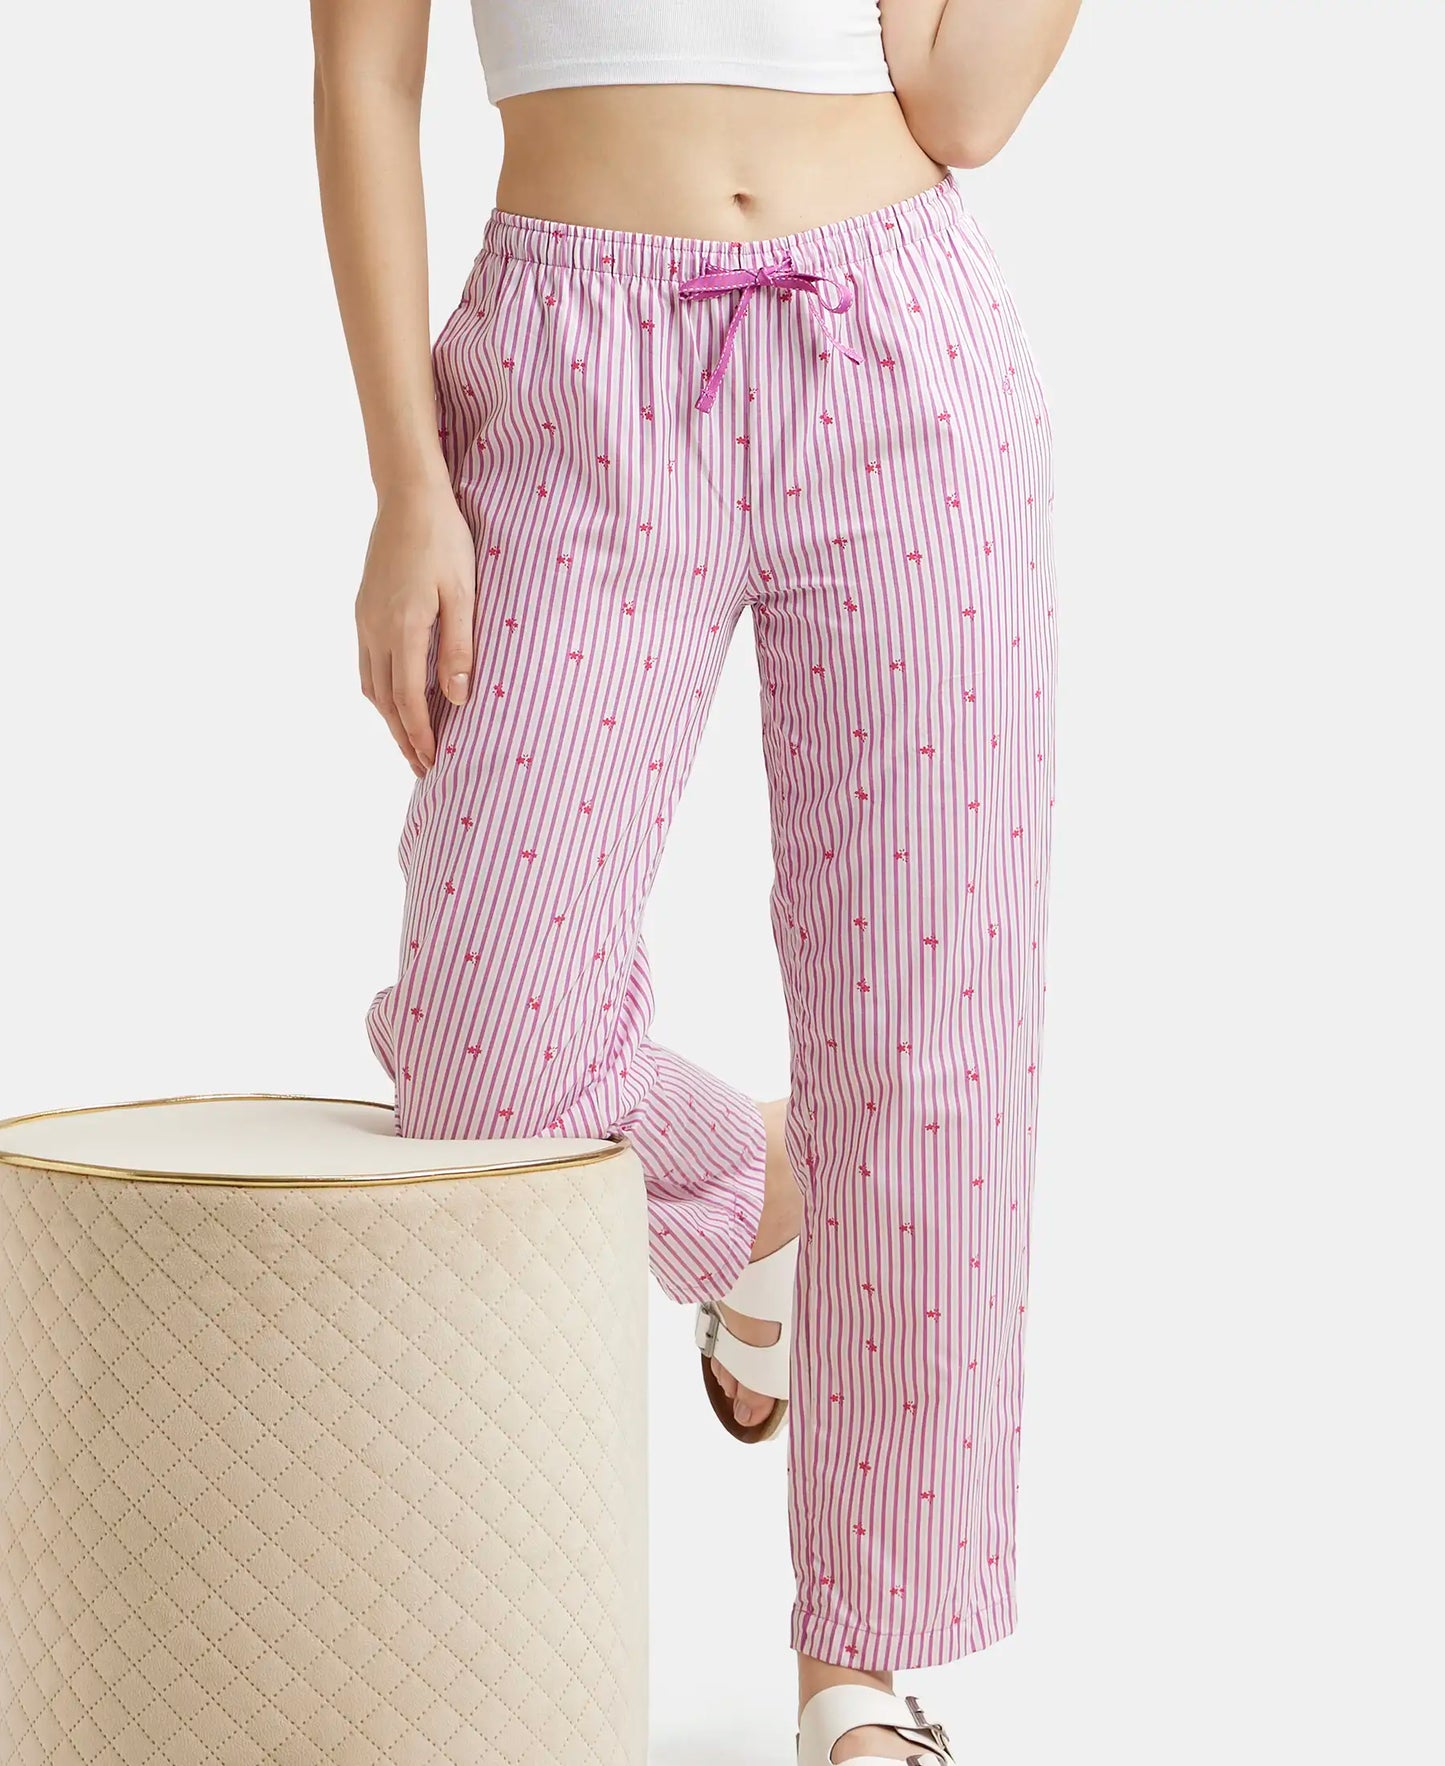 Super Combed Cotton Woven Fabric Relaxed Fit Striped Pyjama with Side Pockets - Lavender Scent Assorted Checks-5